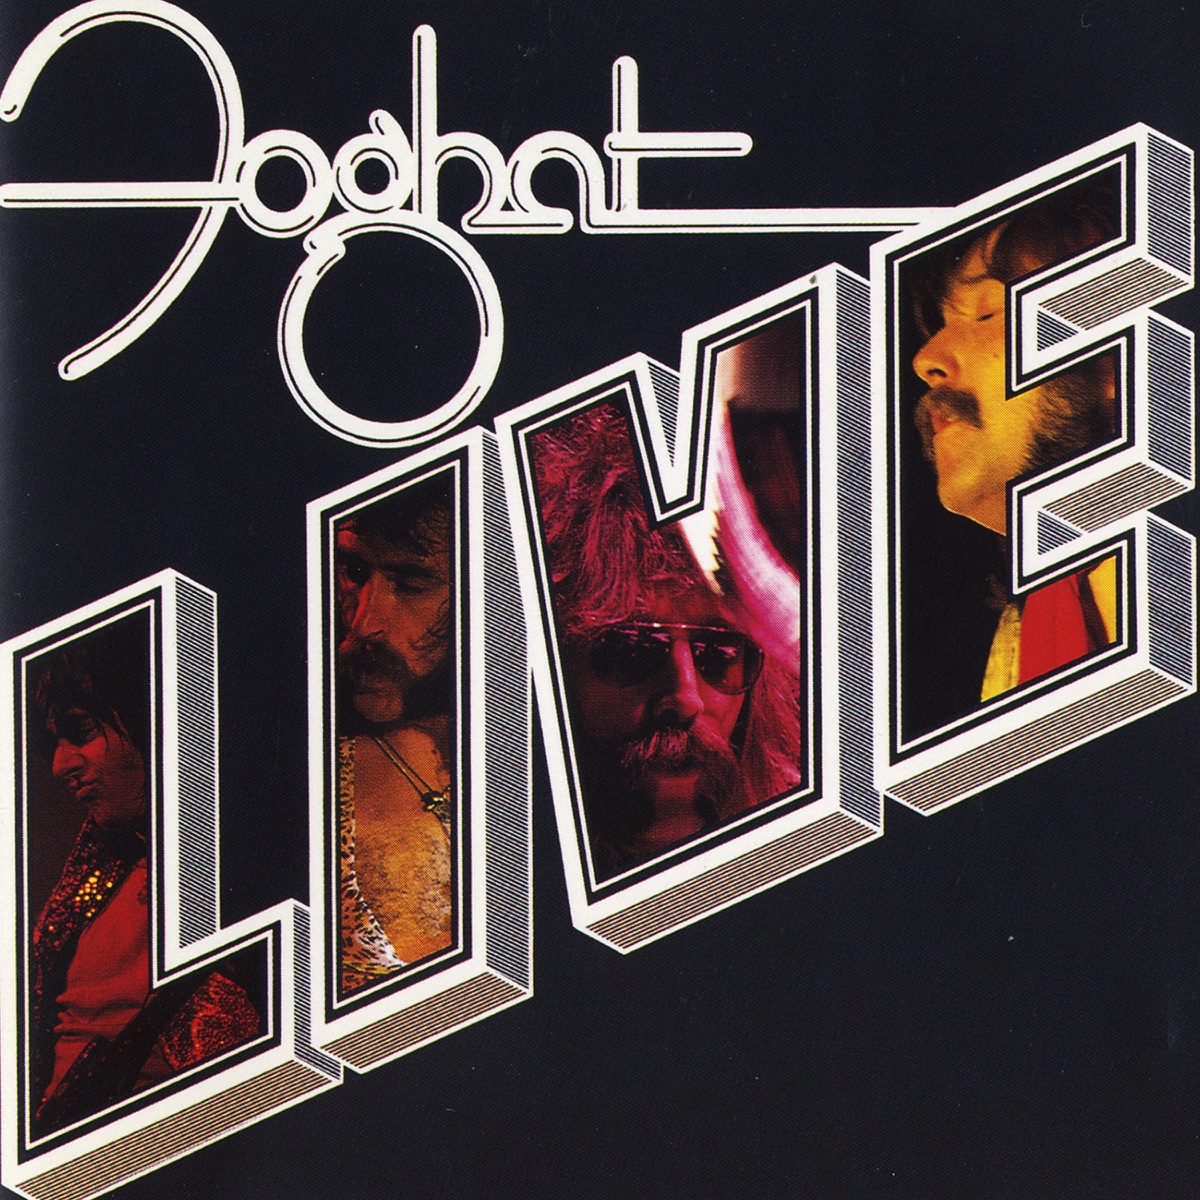 Foghat Live by Foghat on Apple Music